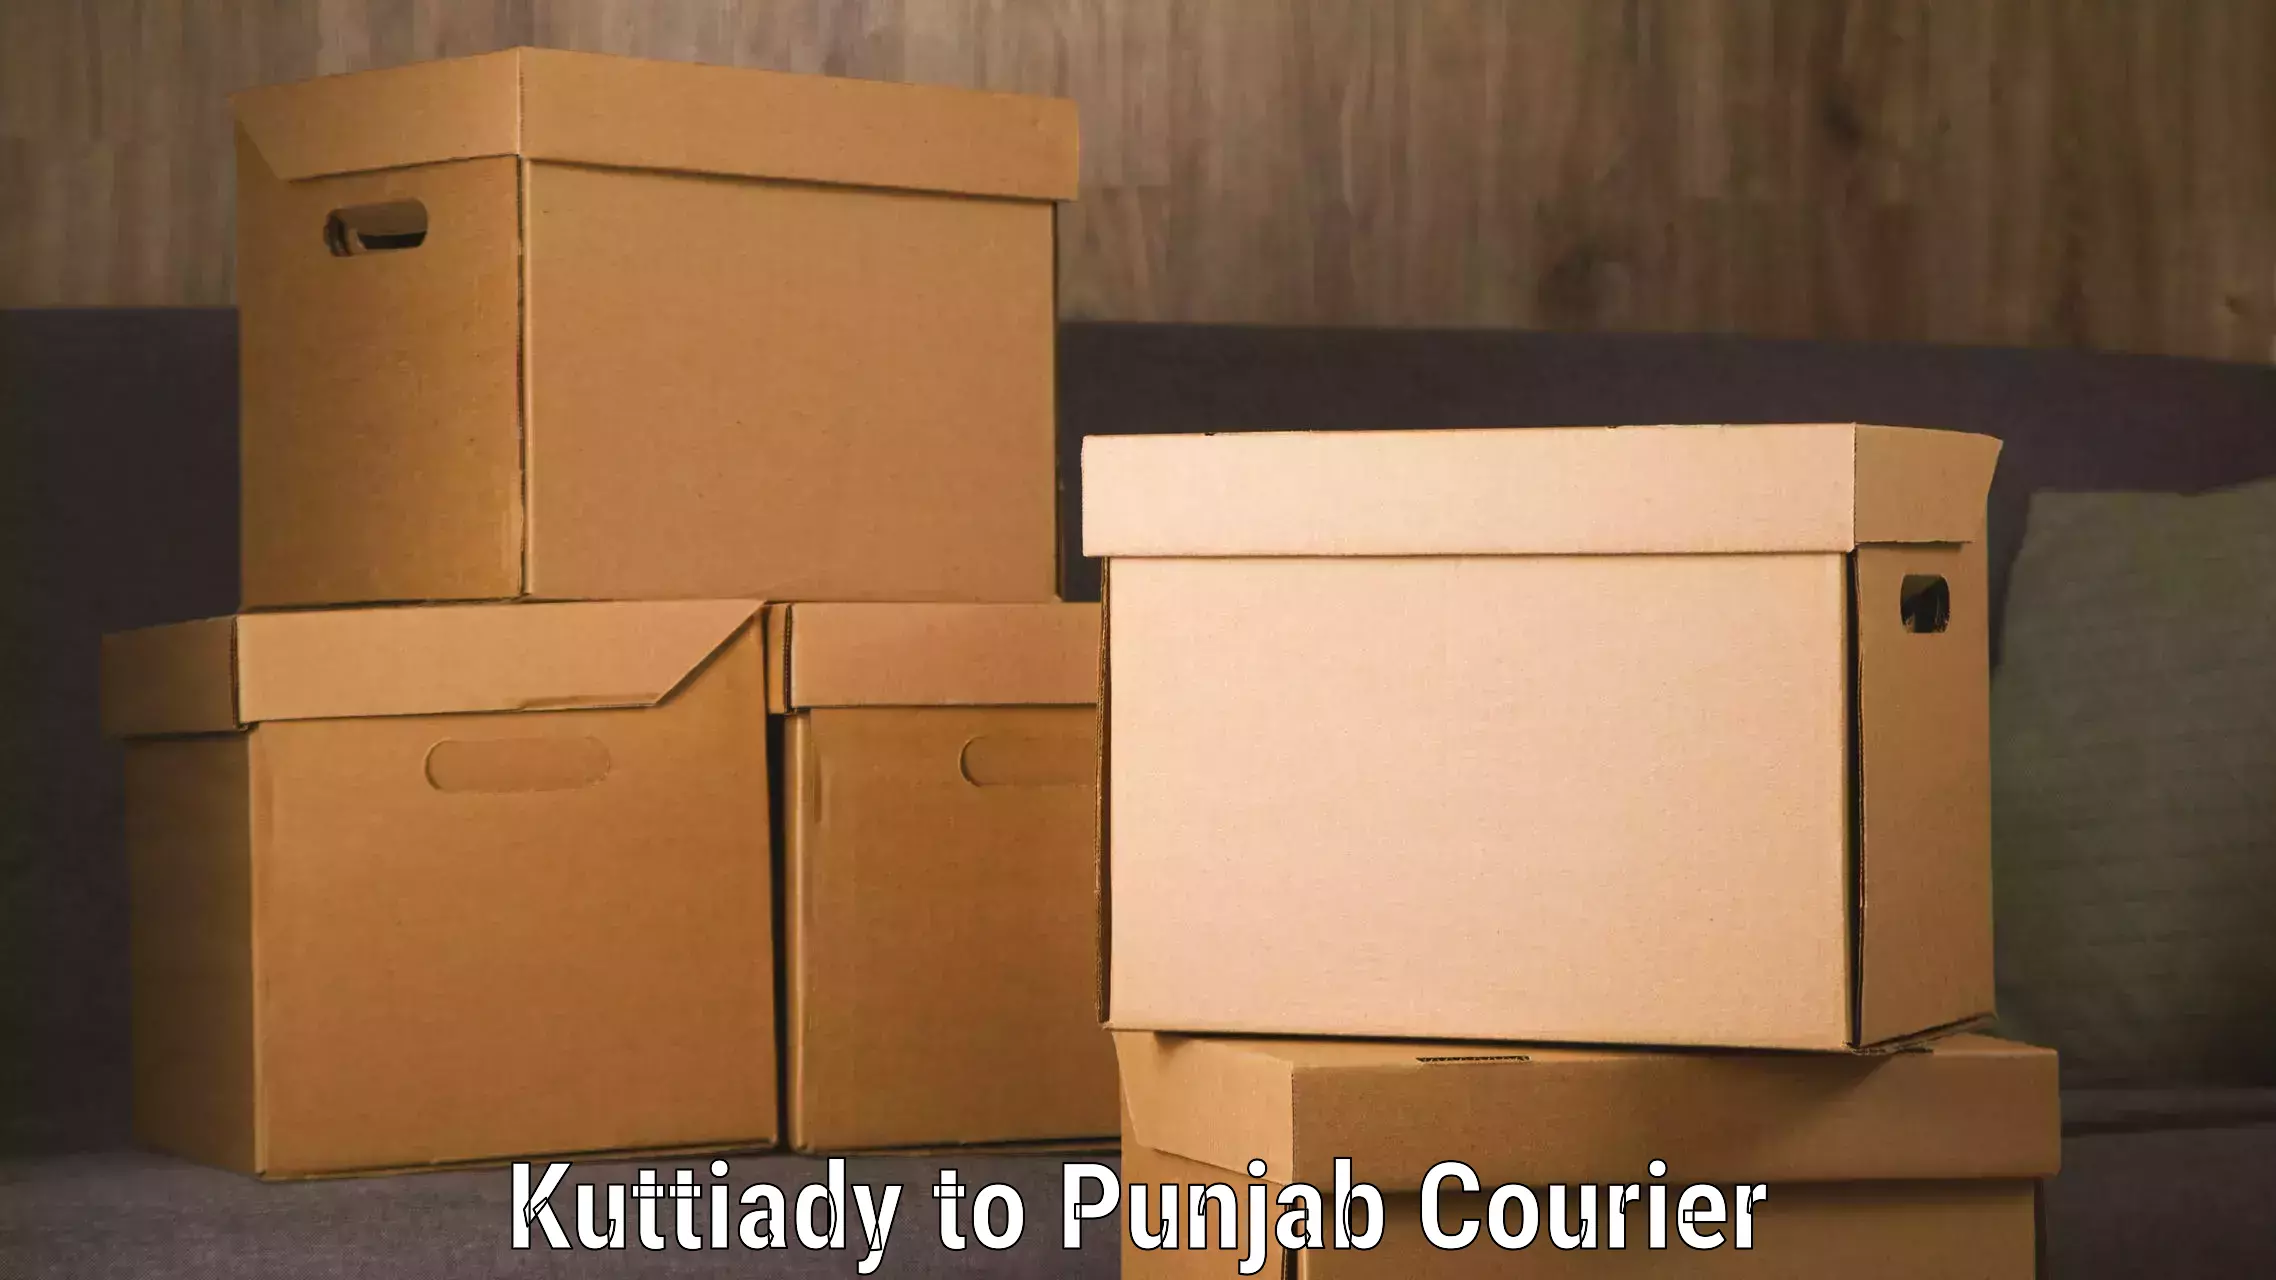 Efficient package consolidation Kuttiady to Punjab